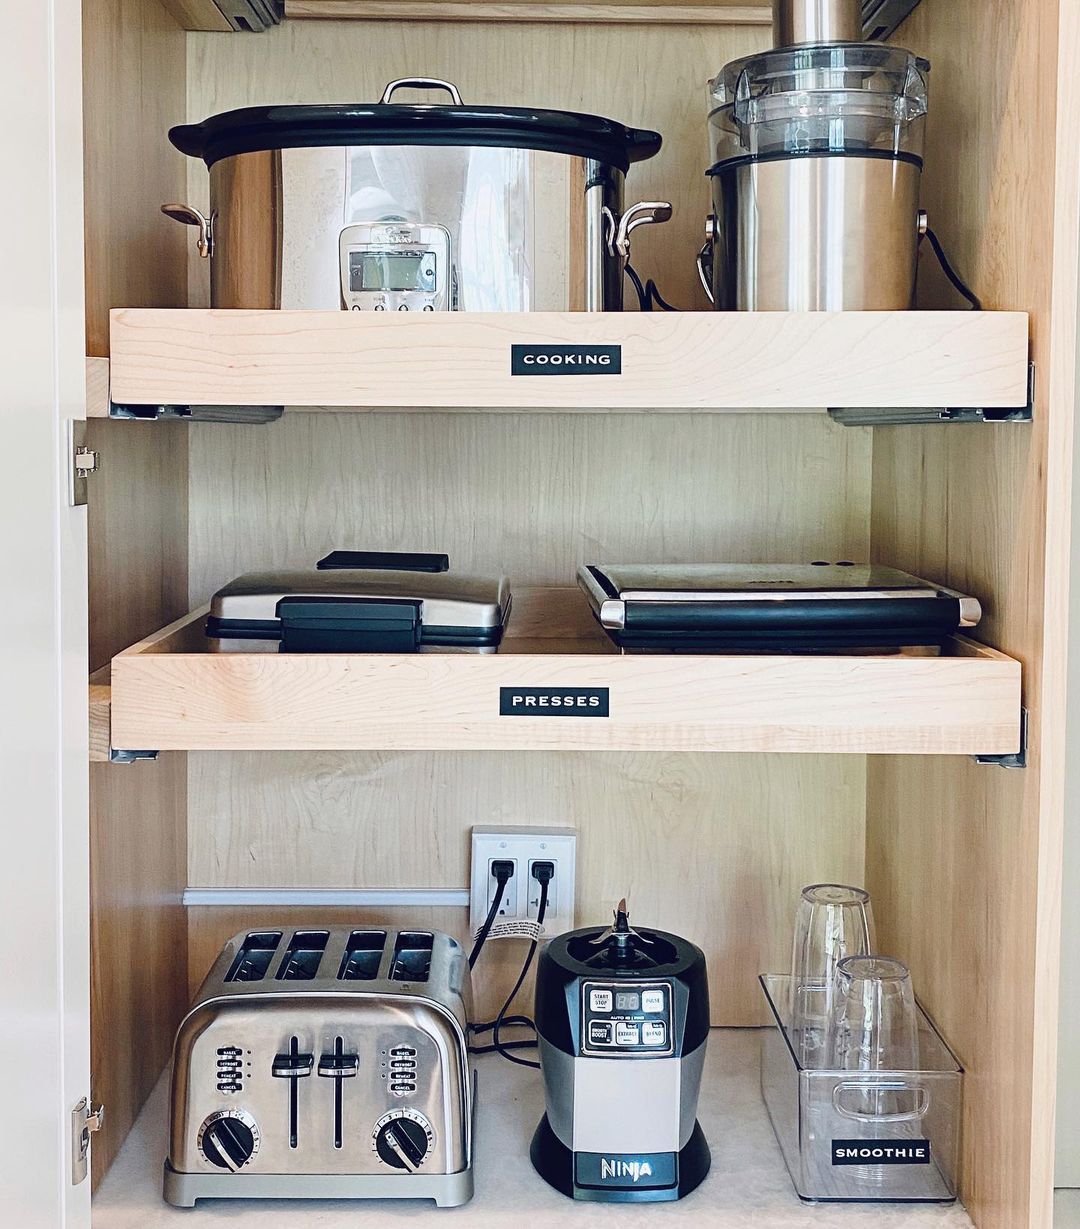 Kitchen cabinet with a slow cooker, blender, toaster, and other small kitchen appliances. Photo by Instagram user @chicly_organized